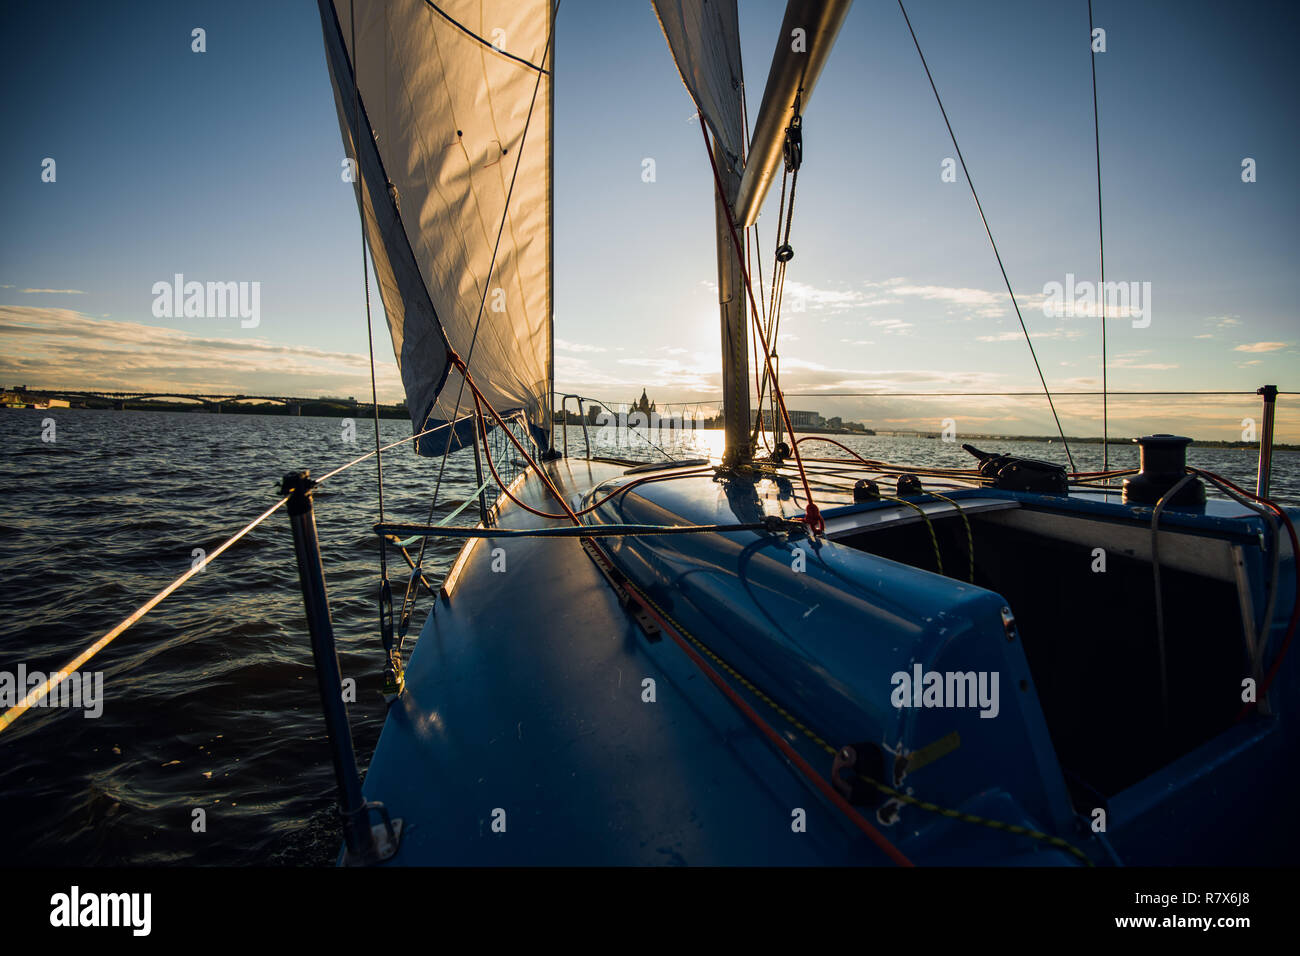 Set Sail High Resolution Stock Photography and Images - Alamy